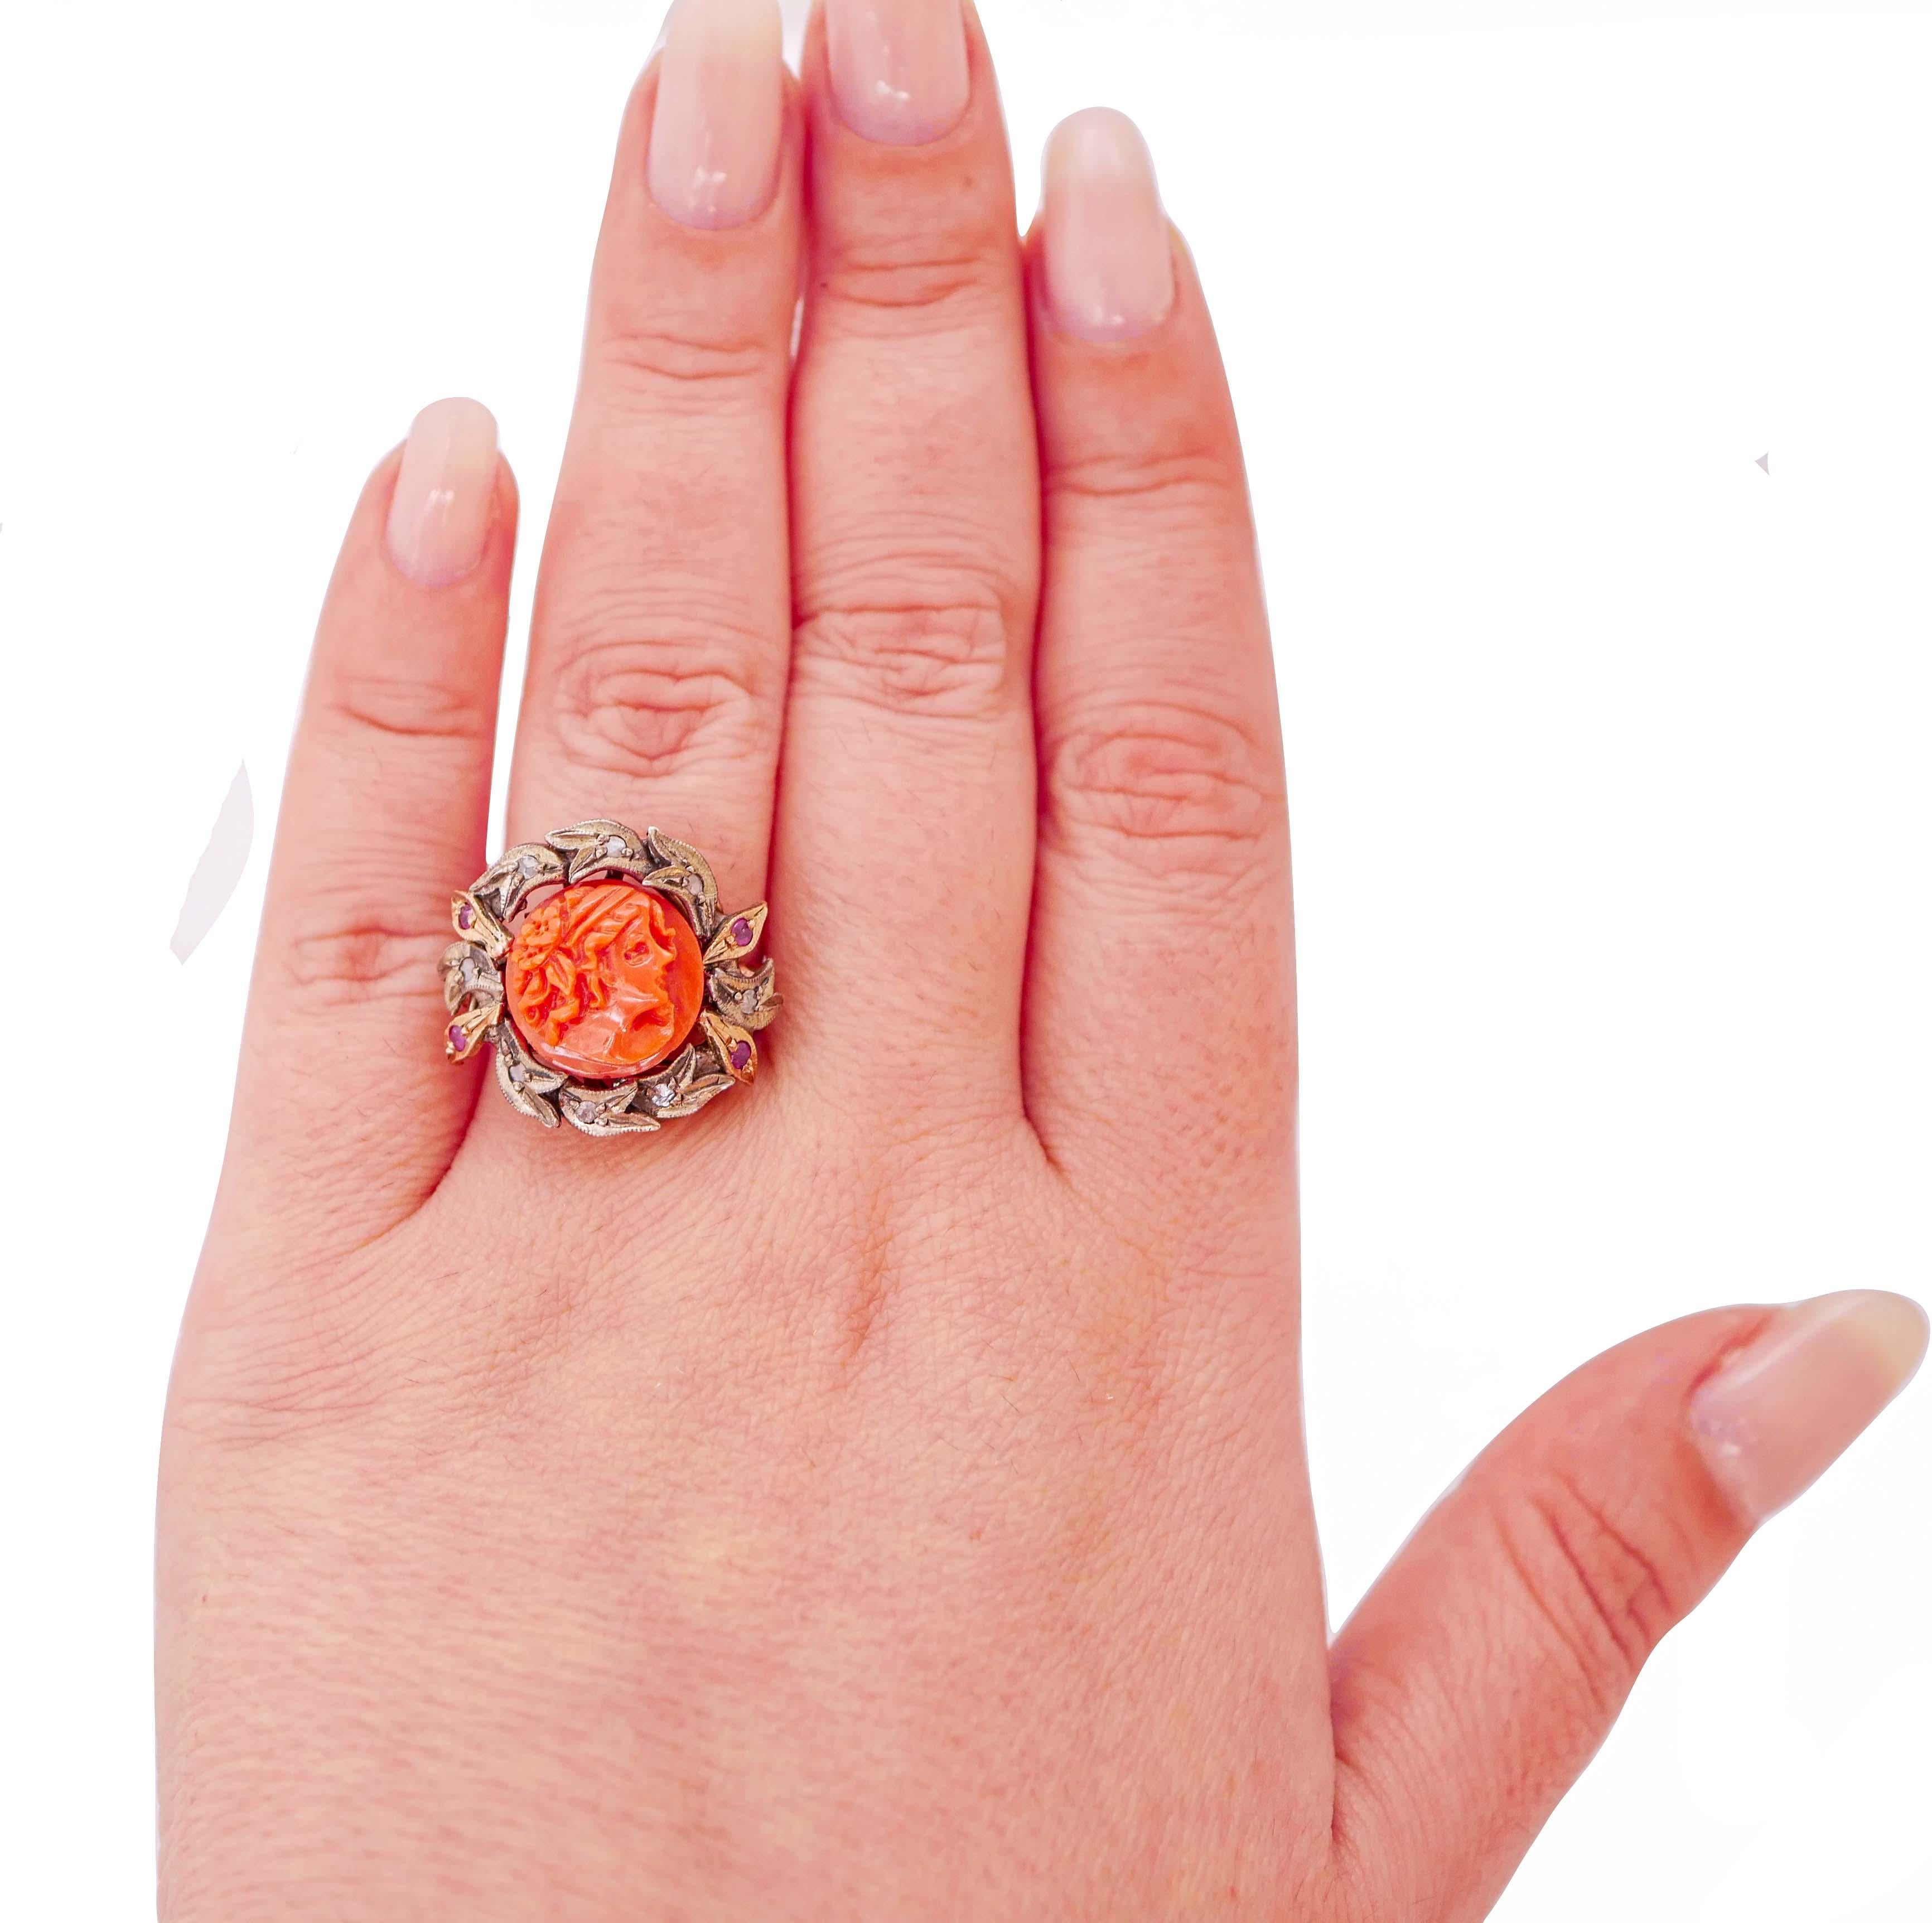 Retro Coral, Rubies, Diamonds, Rose Gold and Silver Ring. For Sale